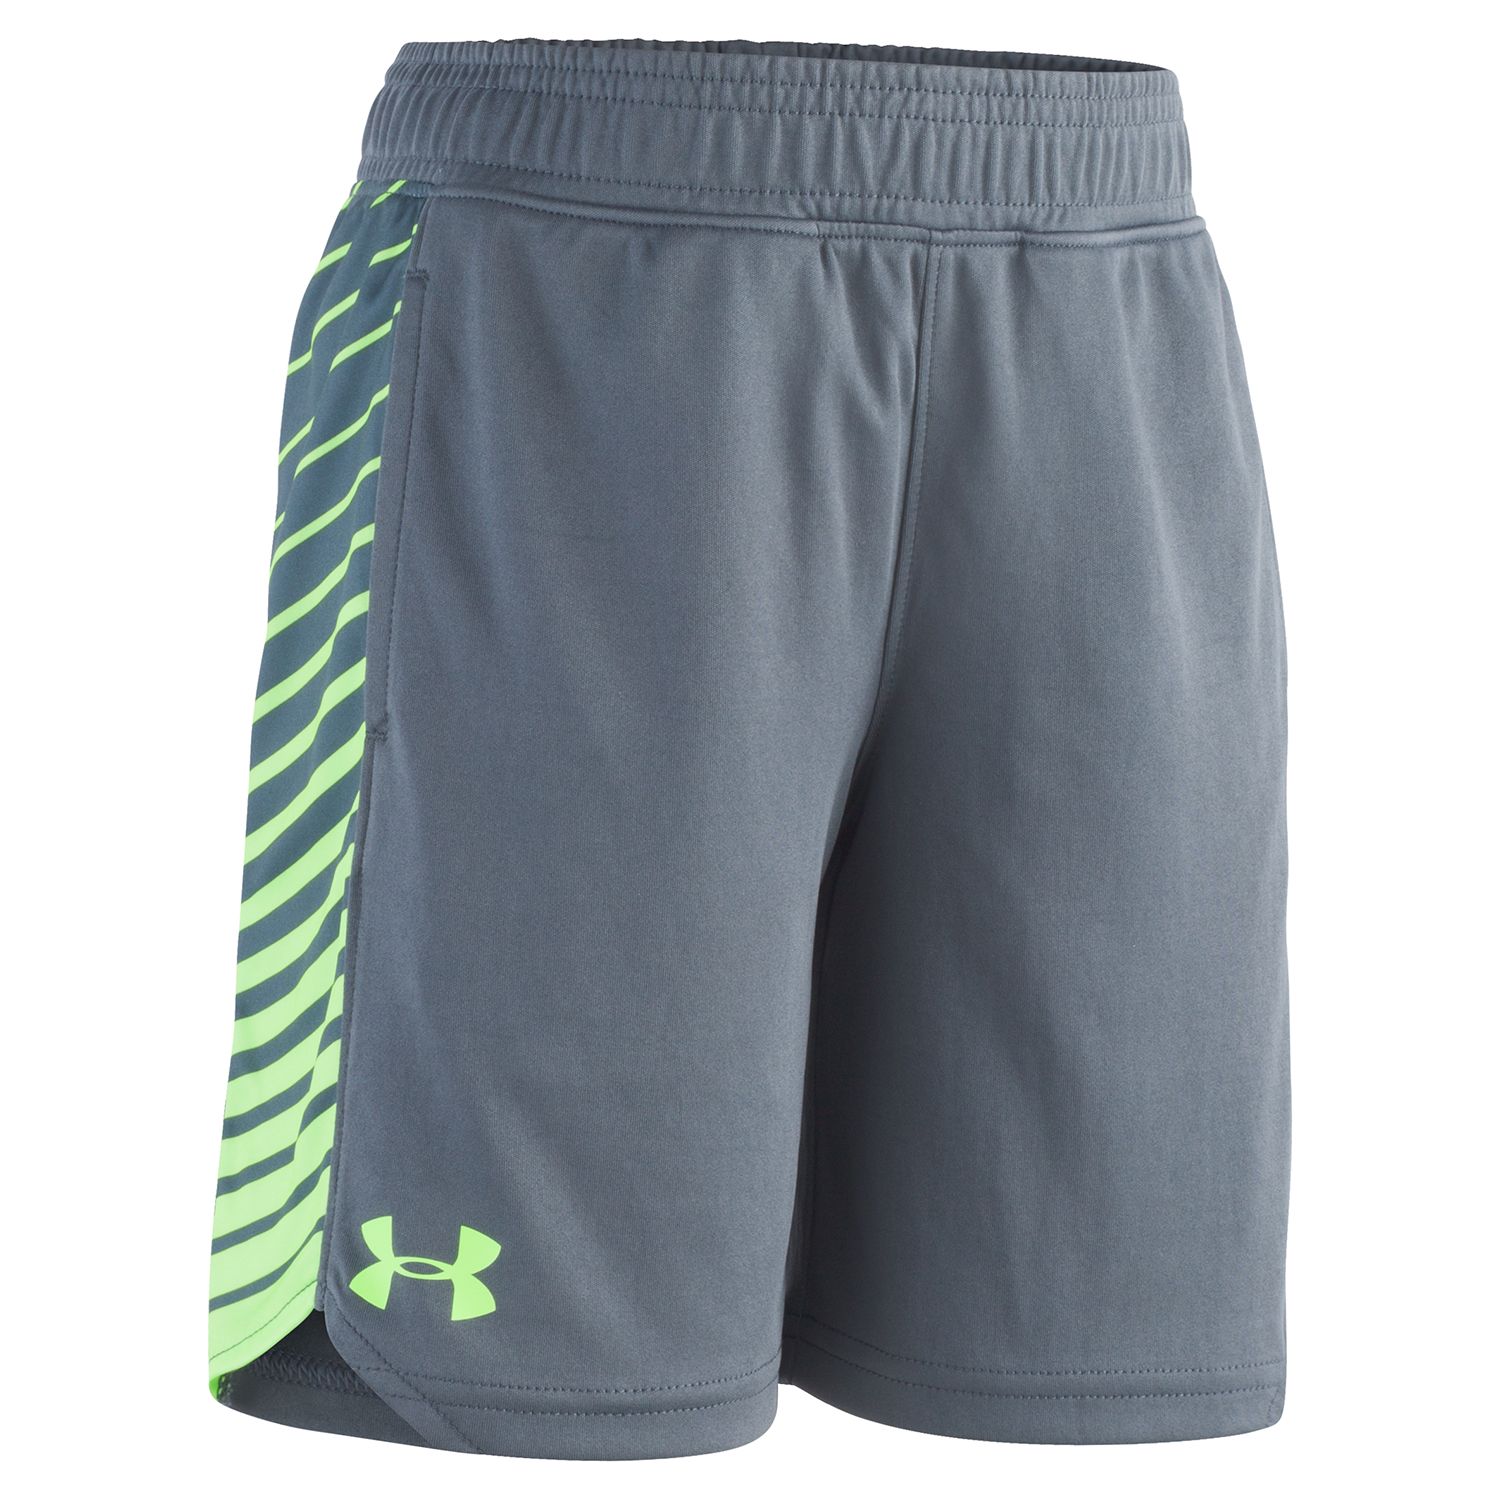 Boys 4-7 Under Armour Side Striped Shorts